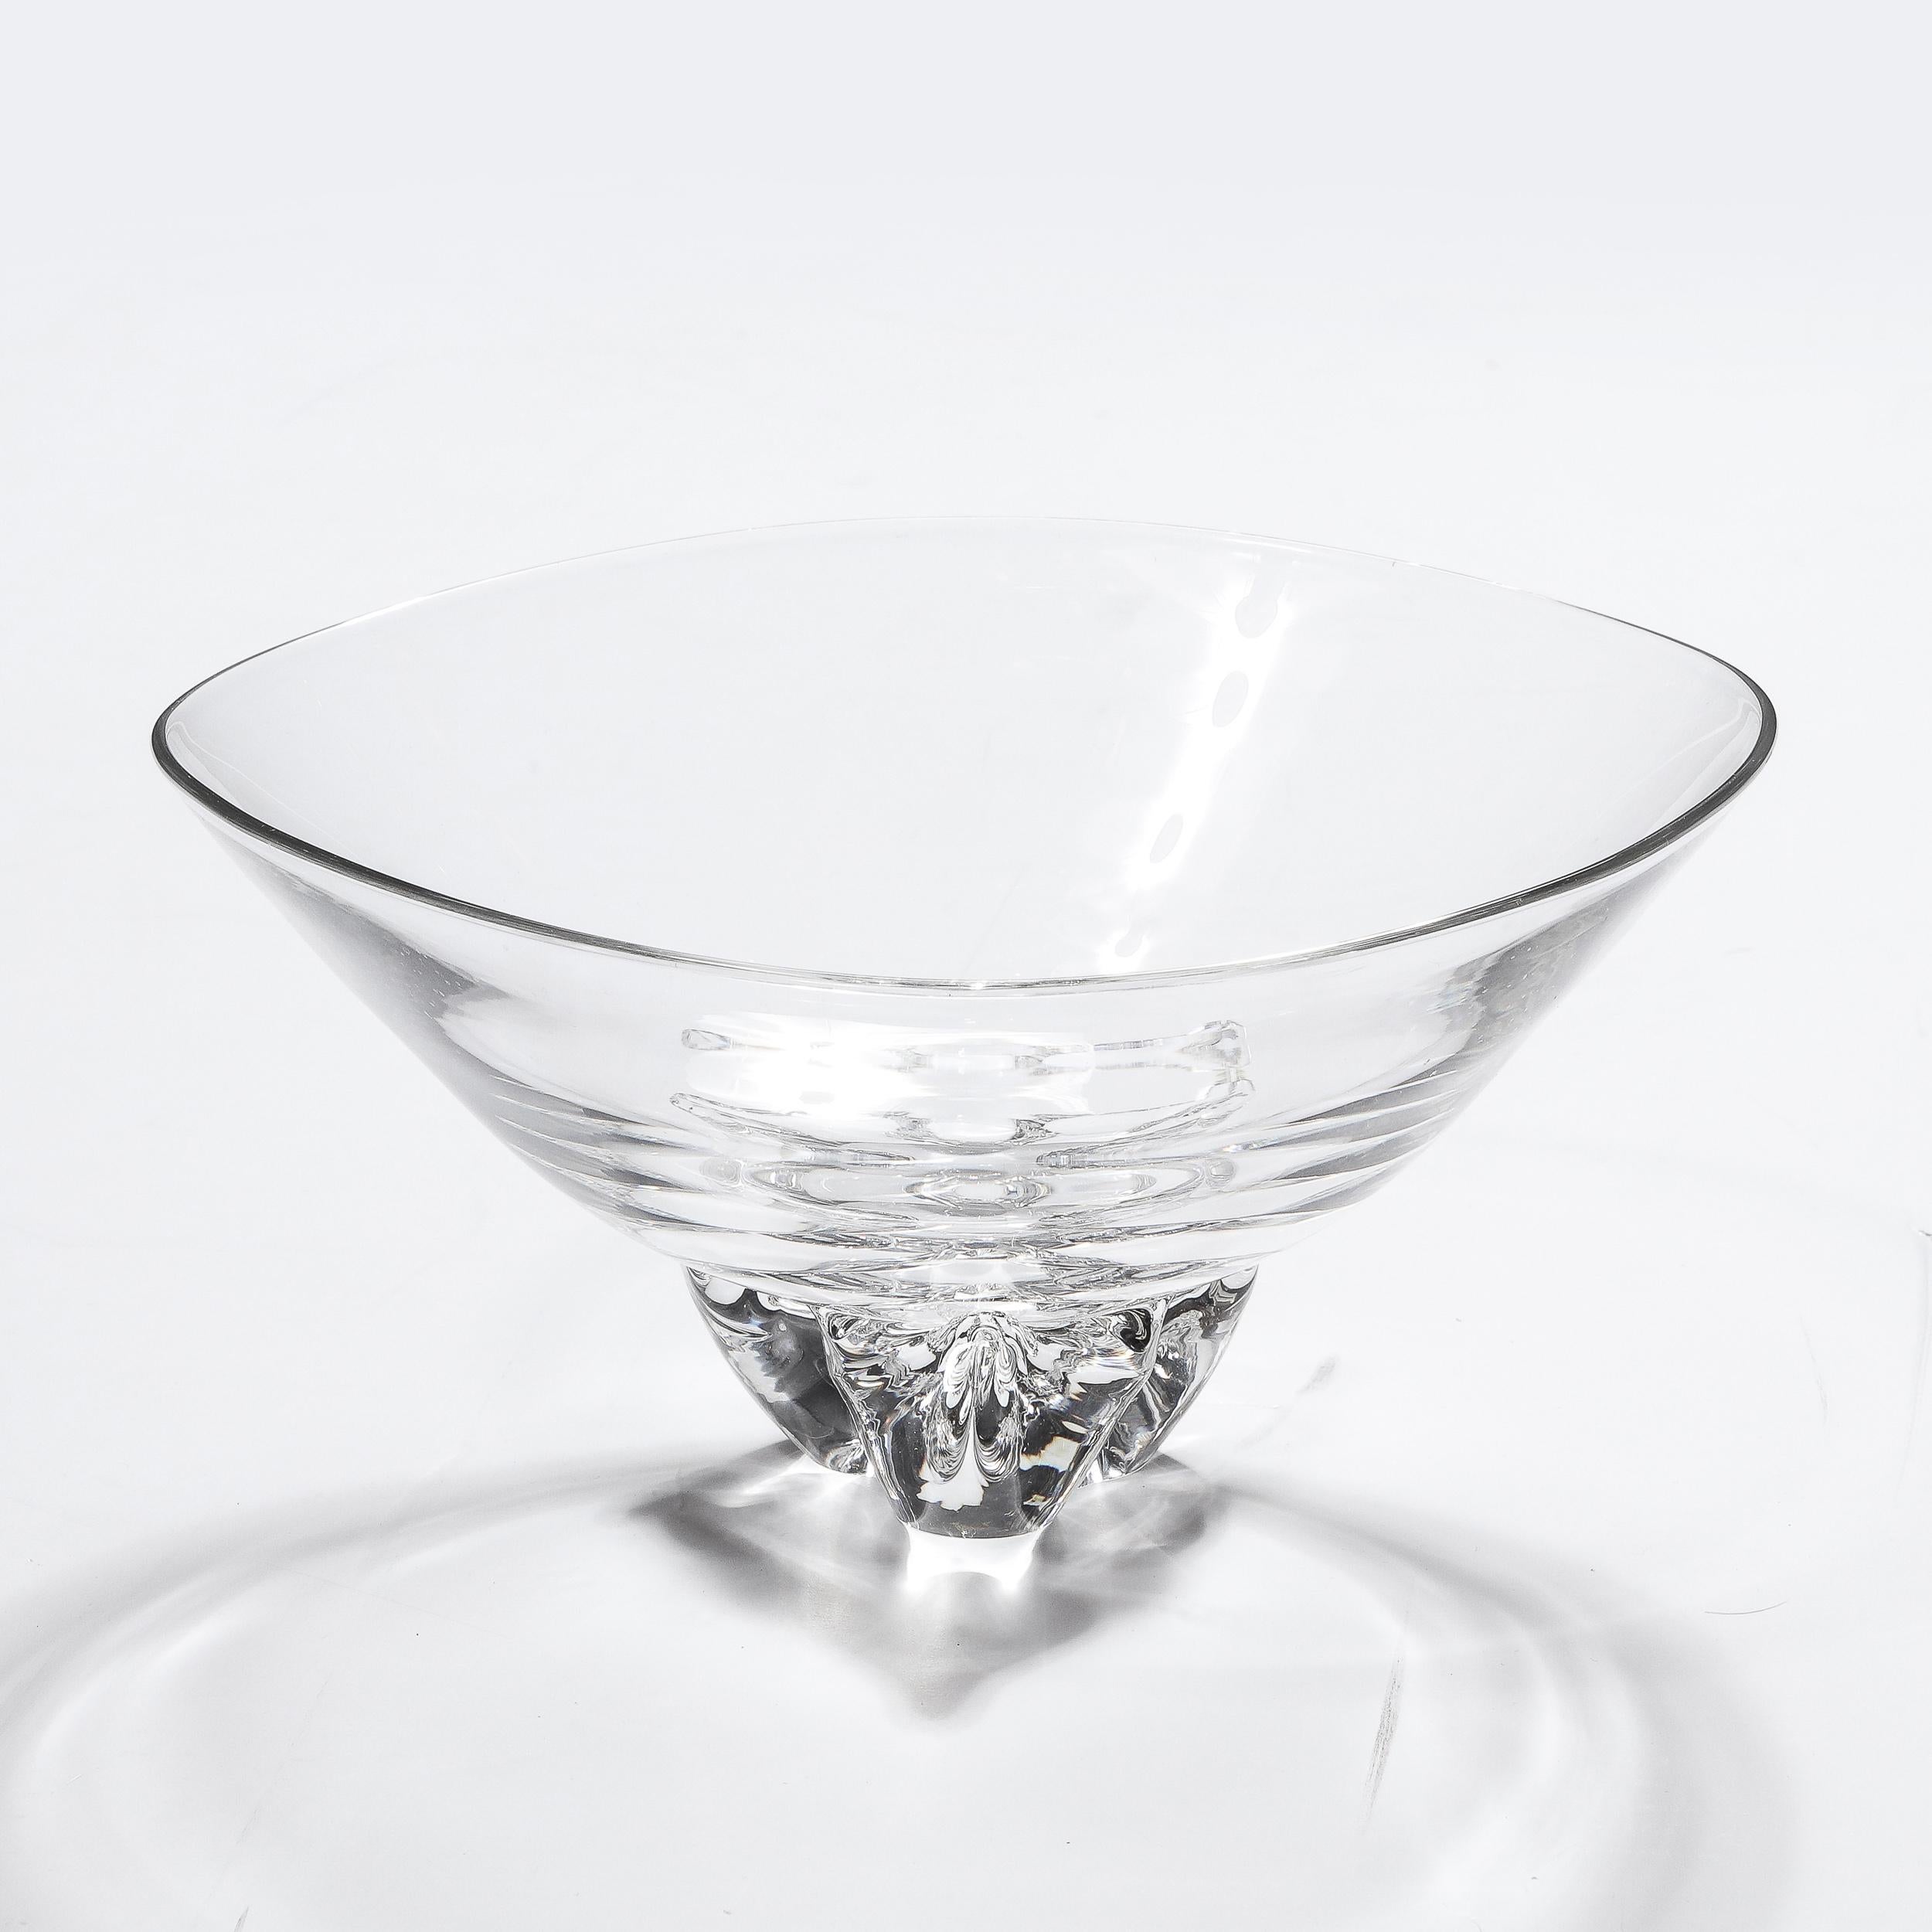 Mid-Century Modernist Hand-Blown Glass Bowl with Organic Base Signed Steuben In Excellent Condition For Sale In New York, NY